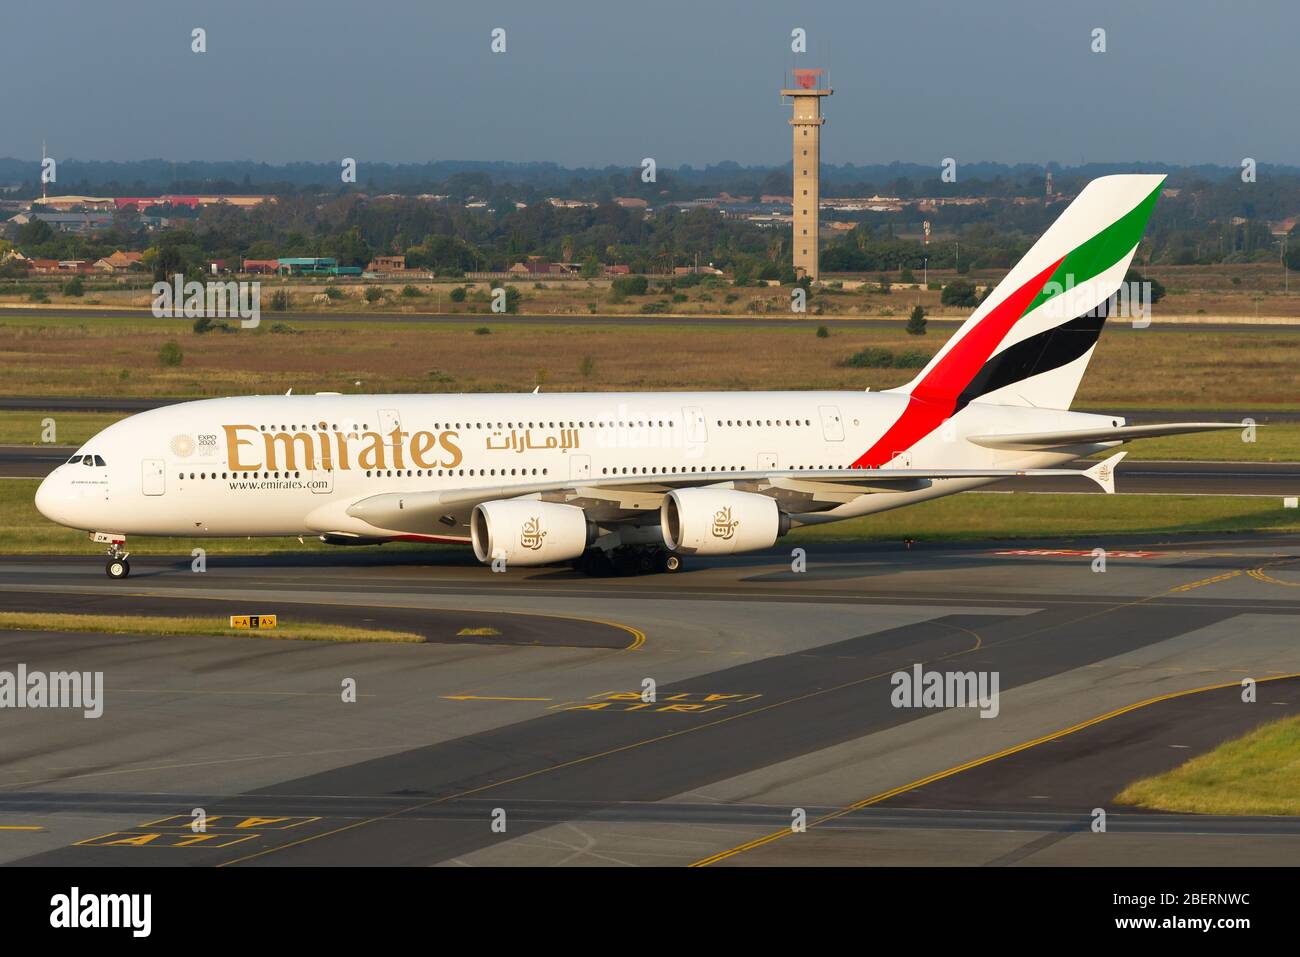 Emirates Airline Airbus A380 taxiing at OR Tambo International Airport in Johannesburg, South Africa. Aircraft registered as A6-EDW. Emirate Airlines. Stock Photo